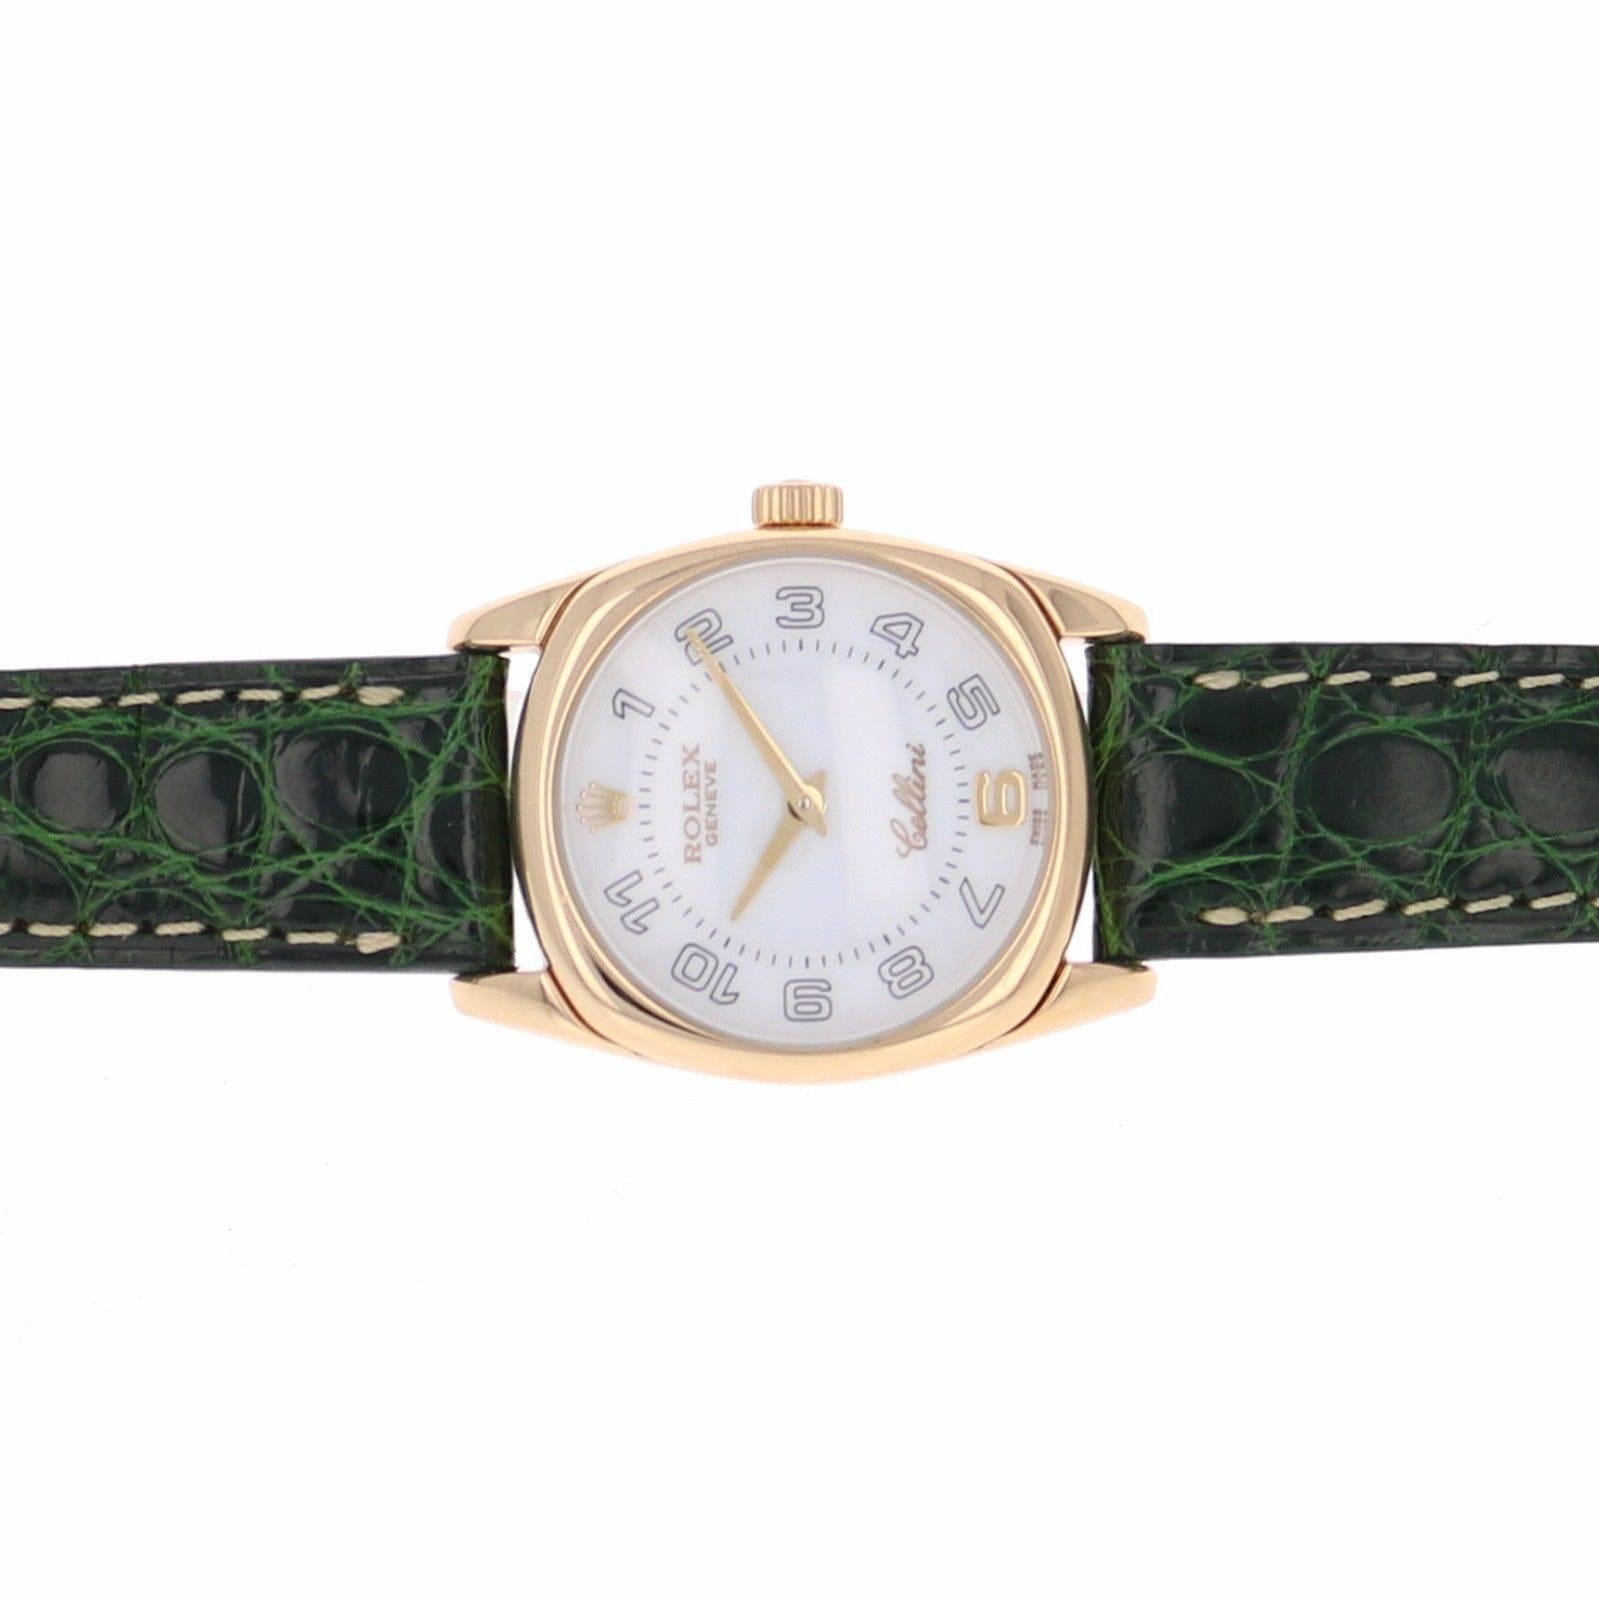 Brand Name 
Rolex 
Style Number 
6229/8 
Also Called 
6229-8 
Series 
Cellini Danaos 
Gender 
Ladies 
Case Material 
18k Yellow Gold 
Dial Color 
White w/ Arabic 
Movement 
Quartz 
Functions 
Hours, Minutes 
Crystal Material 
Sapphire 
Case Diameter